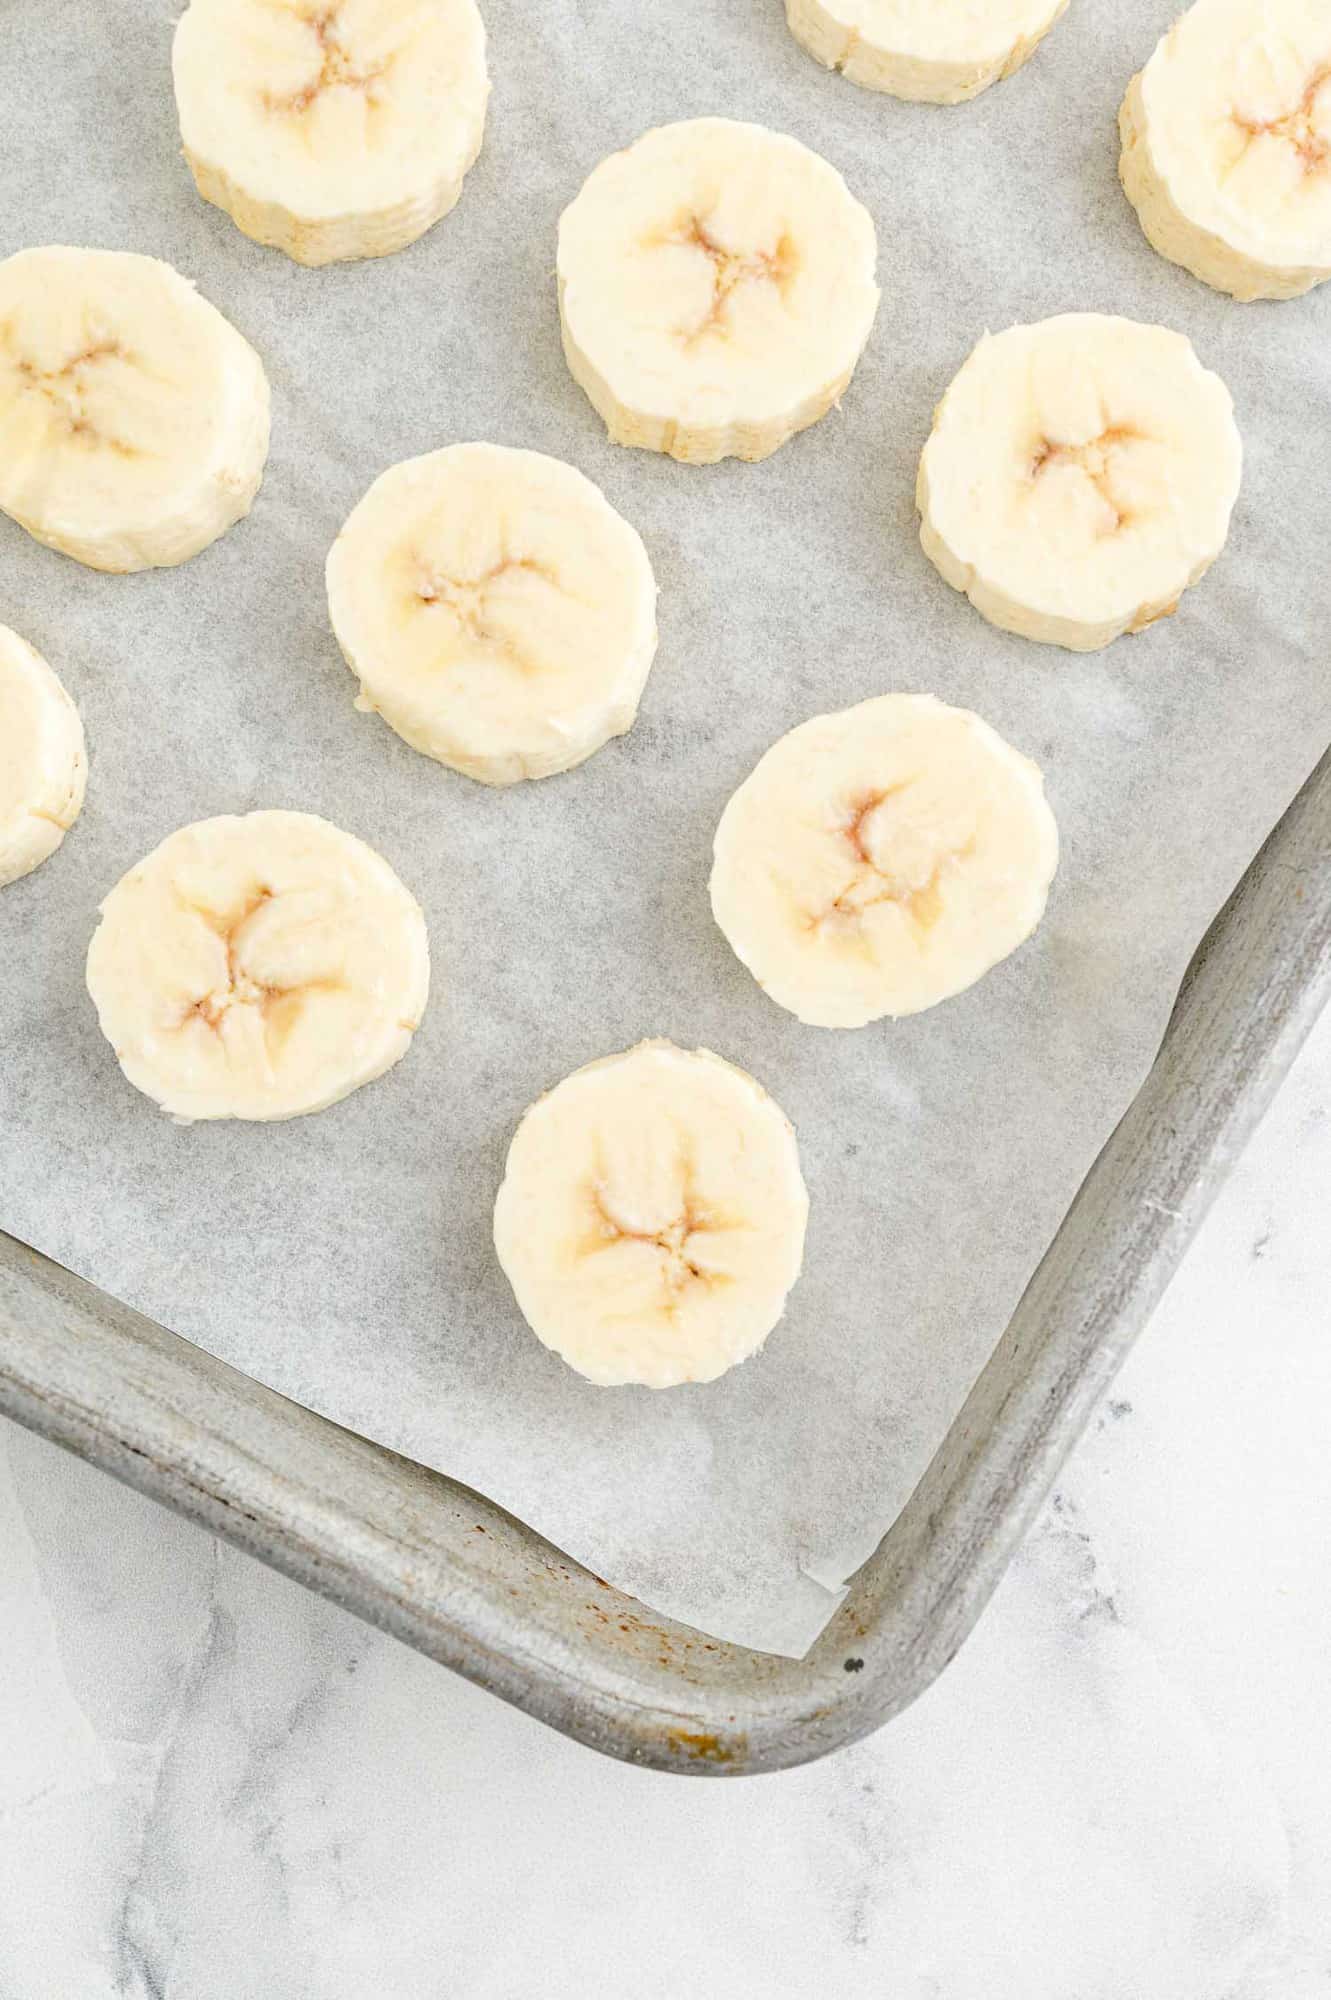 Sliced bananas on a sheet pan lined with parchment.